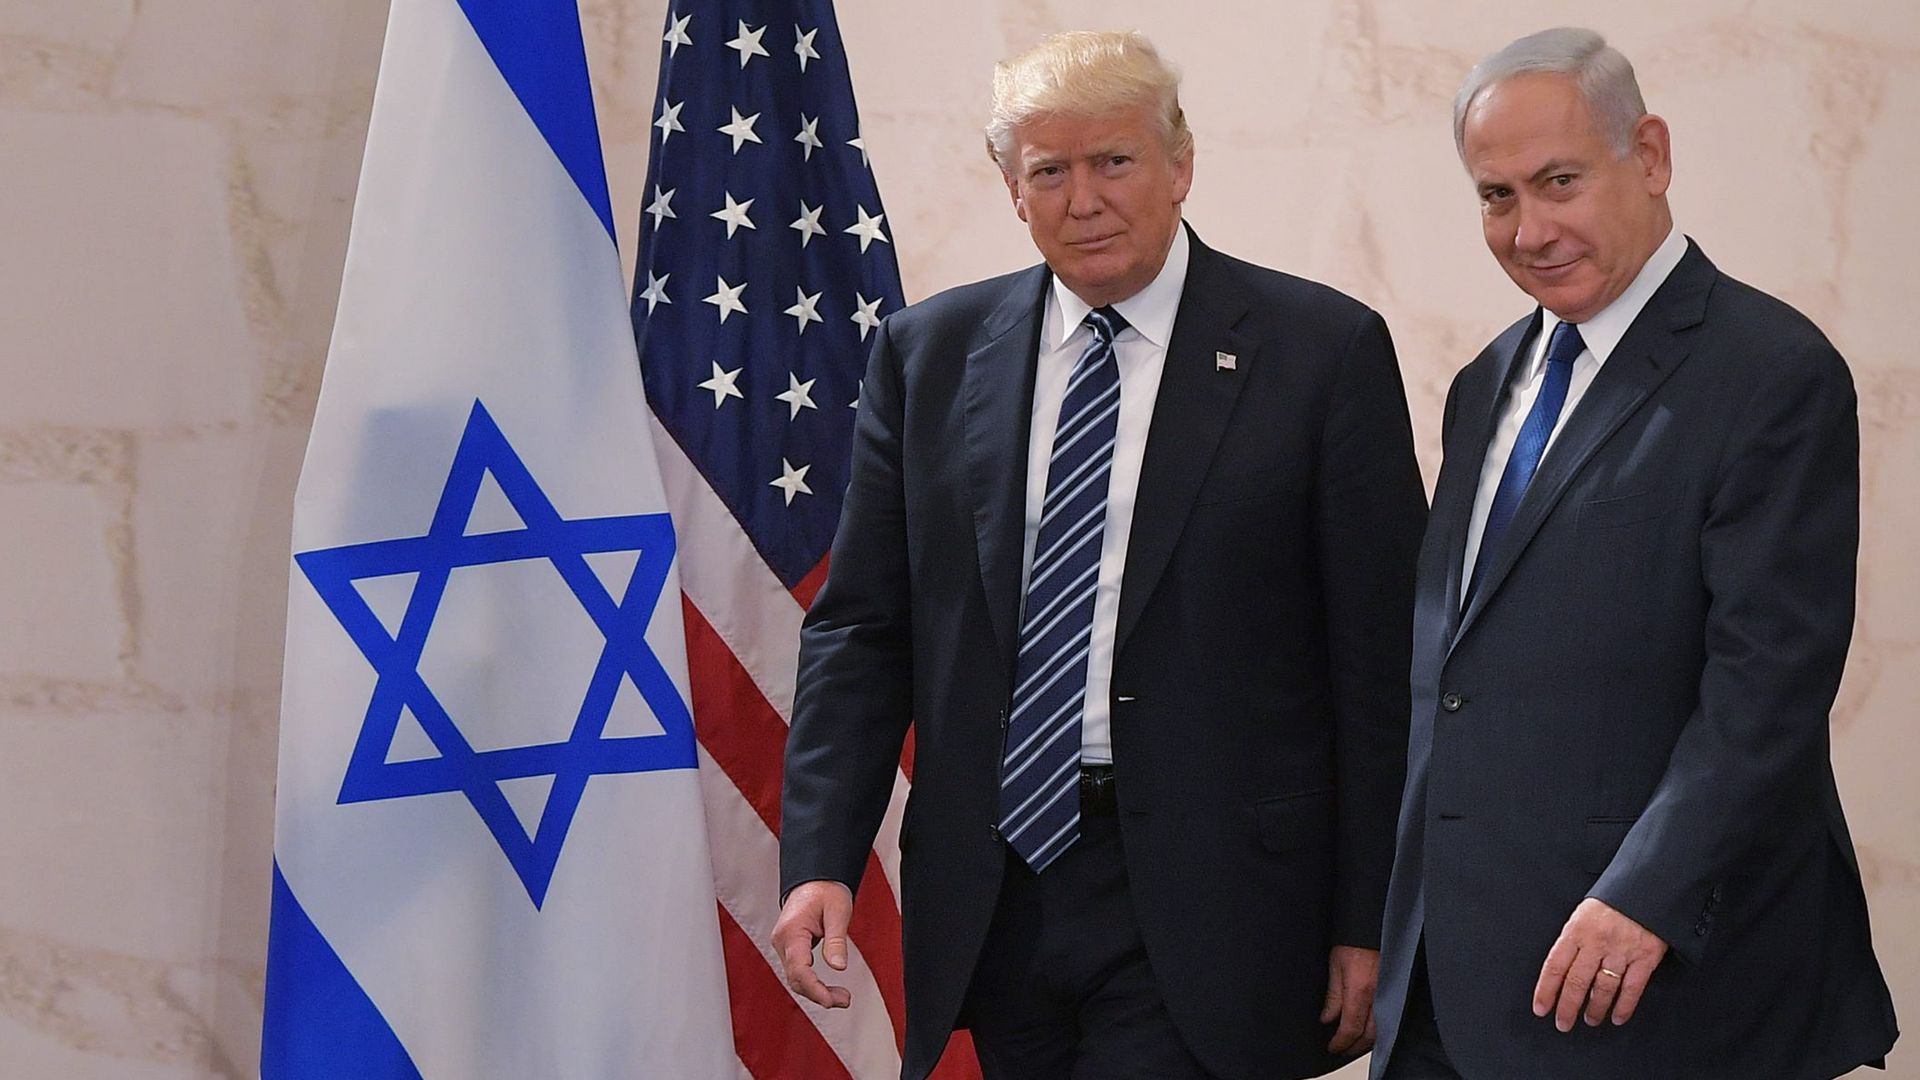 President Donald Trump (L) arrives at the Israel Museum to speak in Jerusalem on May 23, 2017, accompanied by Israeli Prime Minister Benjamin Netanyahu. 